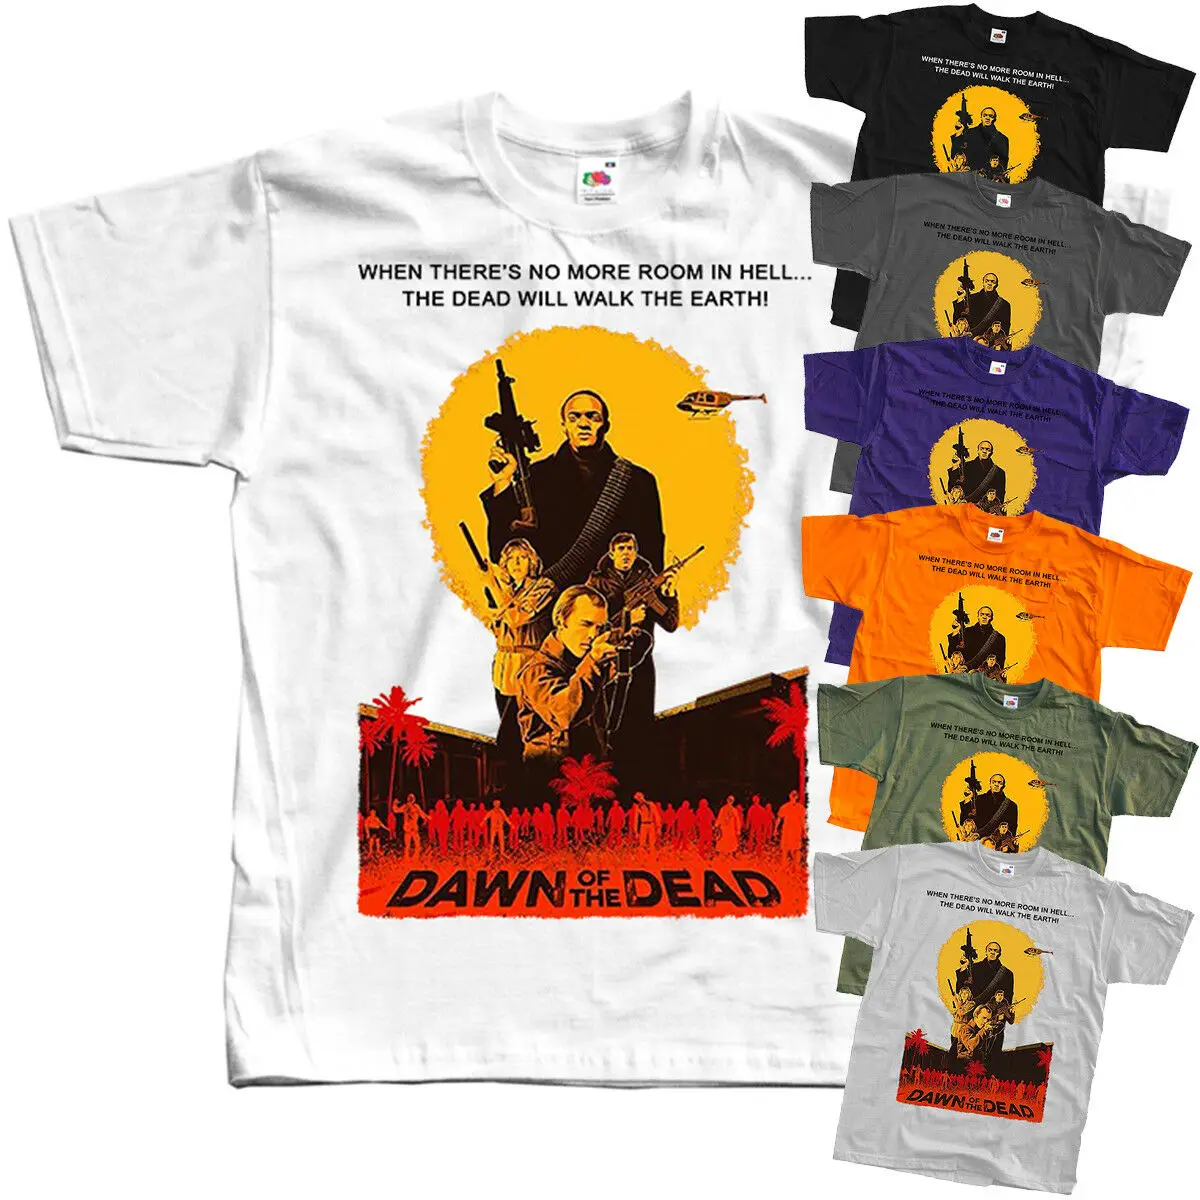 

Dawn of the Dead V3, movie poster 1978, T-Shirt (WHITE,BLACK) ALL SIZES S-5XL